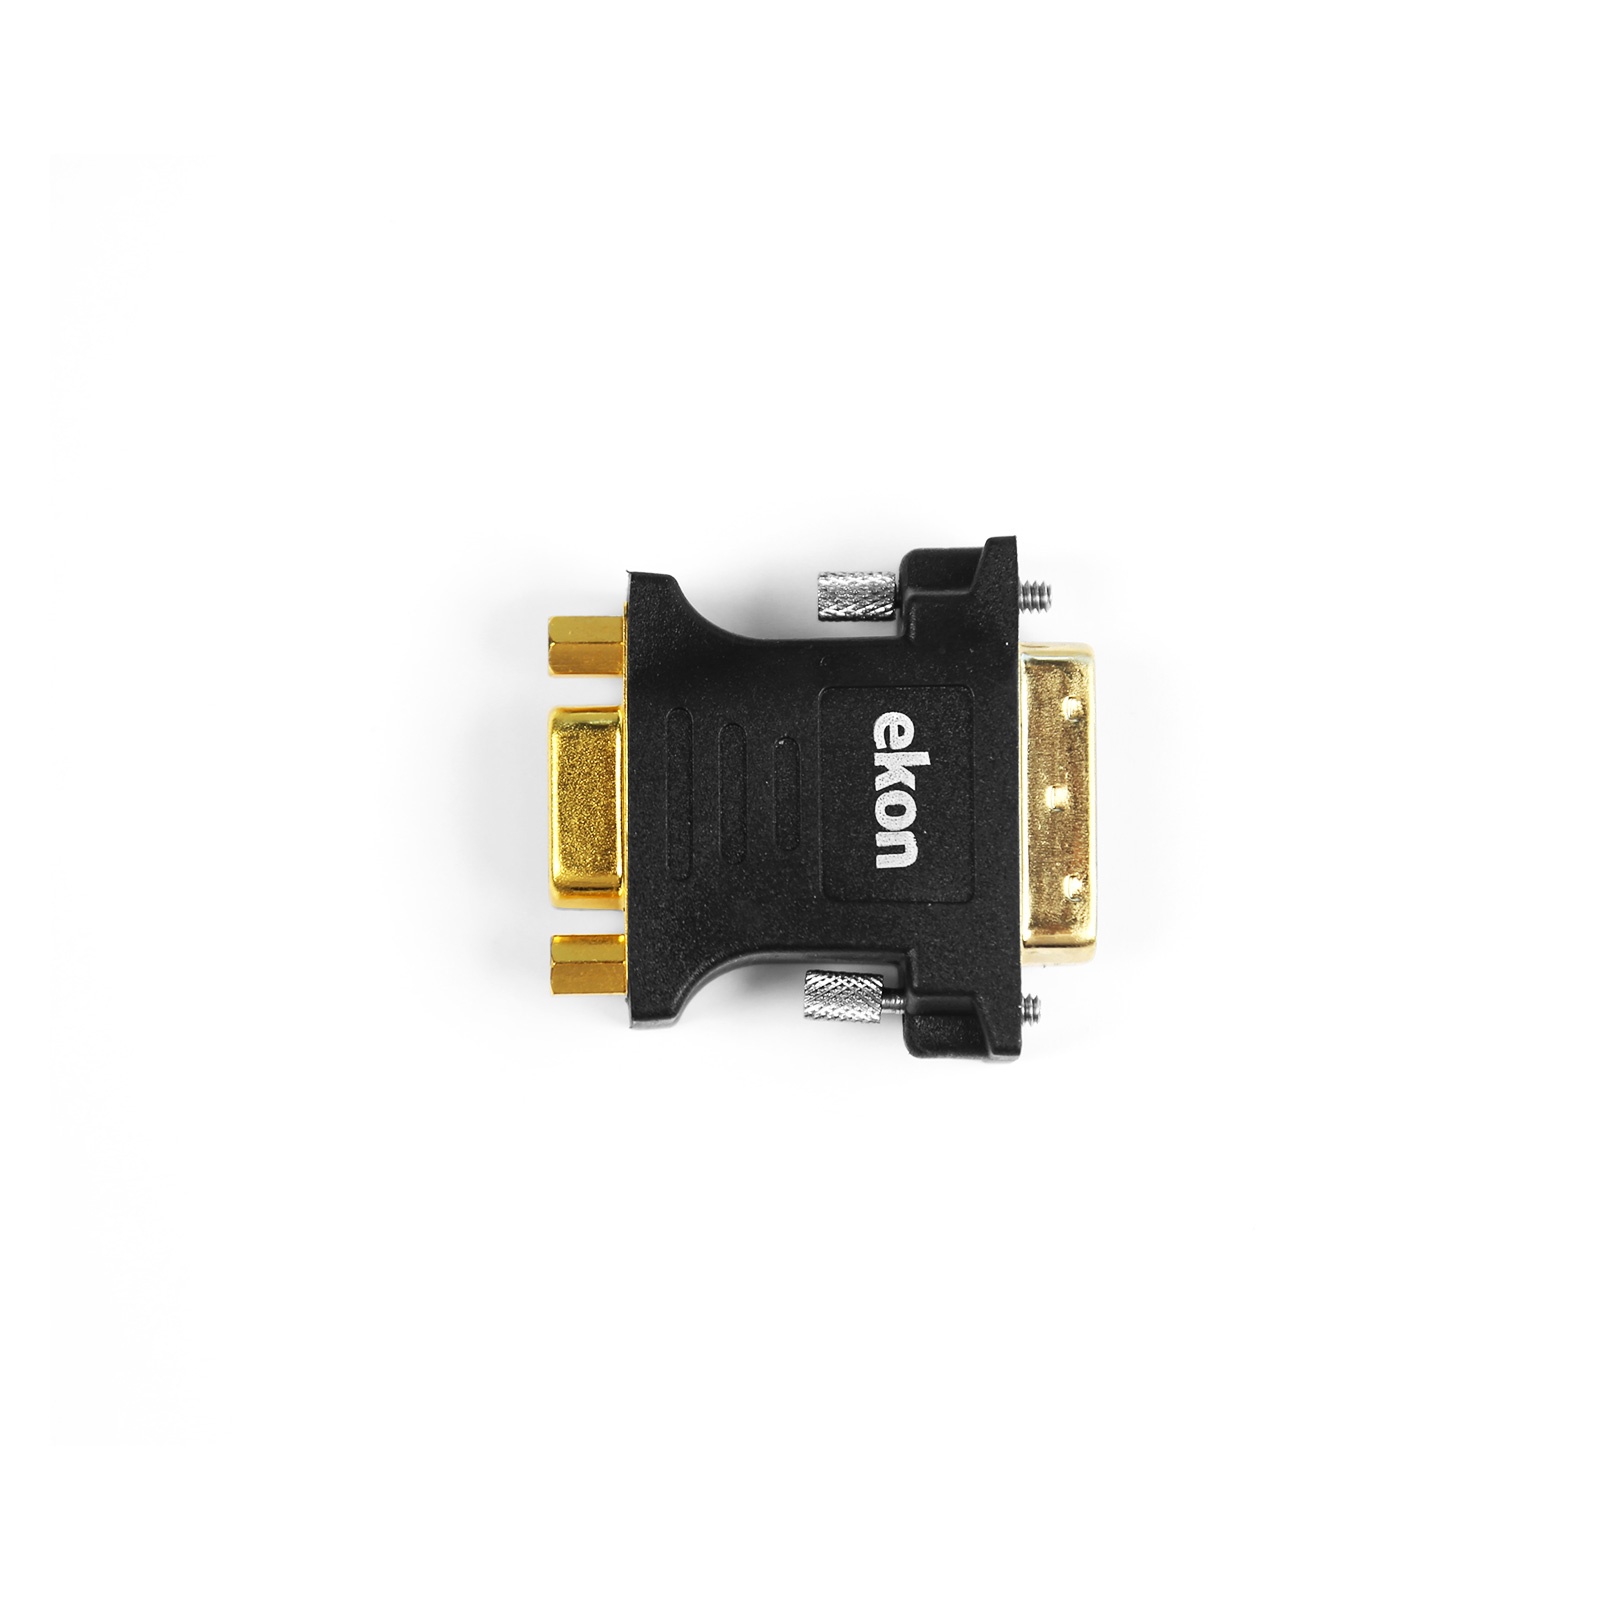 EKON HDMI male to VGA female adapter with 3,5mm Jack plug, golden connectors